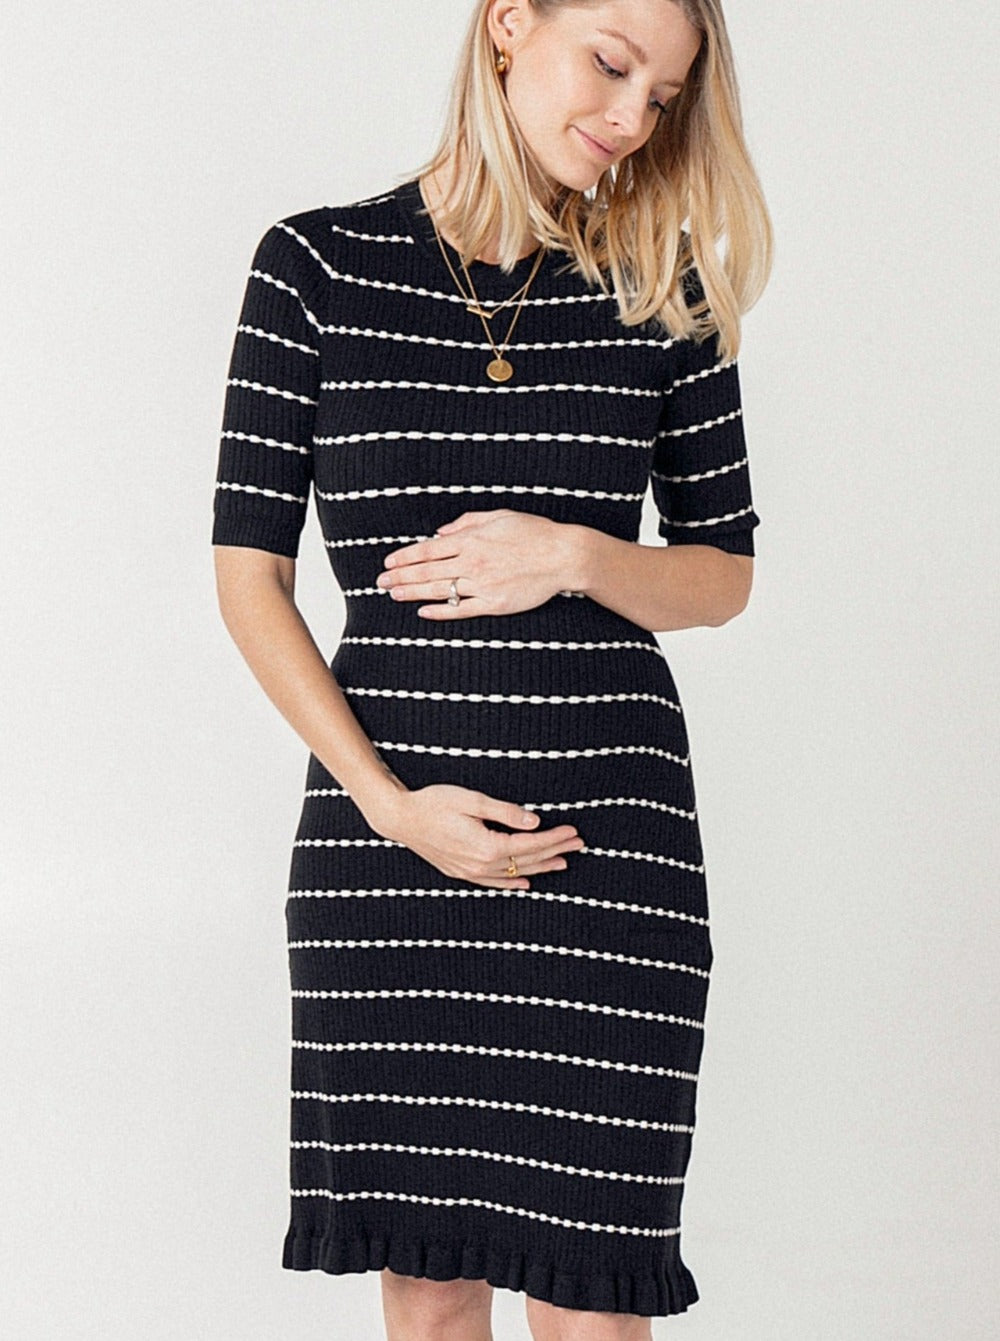 MARION black and white striped knit dress for maternity and mama. 3/4 sleeves, luxury cotton knit fabric, classic round neck, and feminine hemline make this dress perfect for work and play, pregnancy and after!